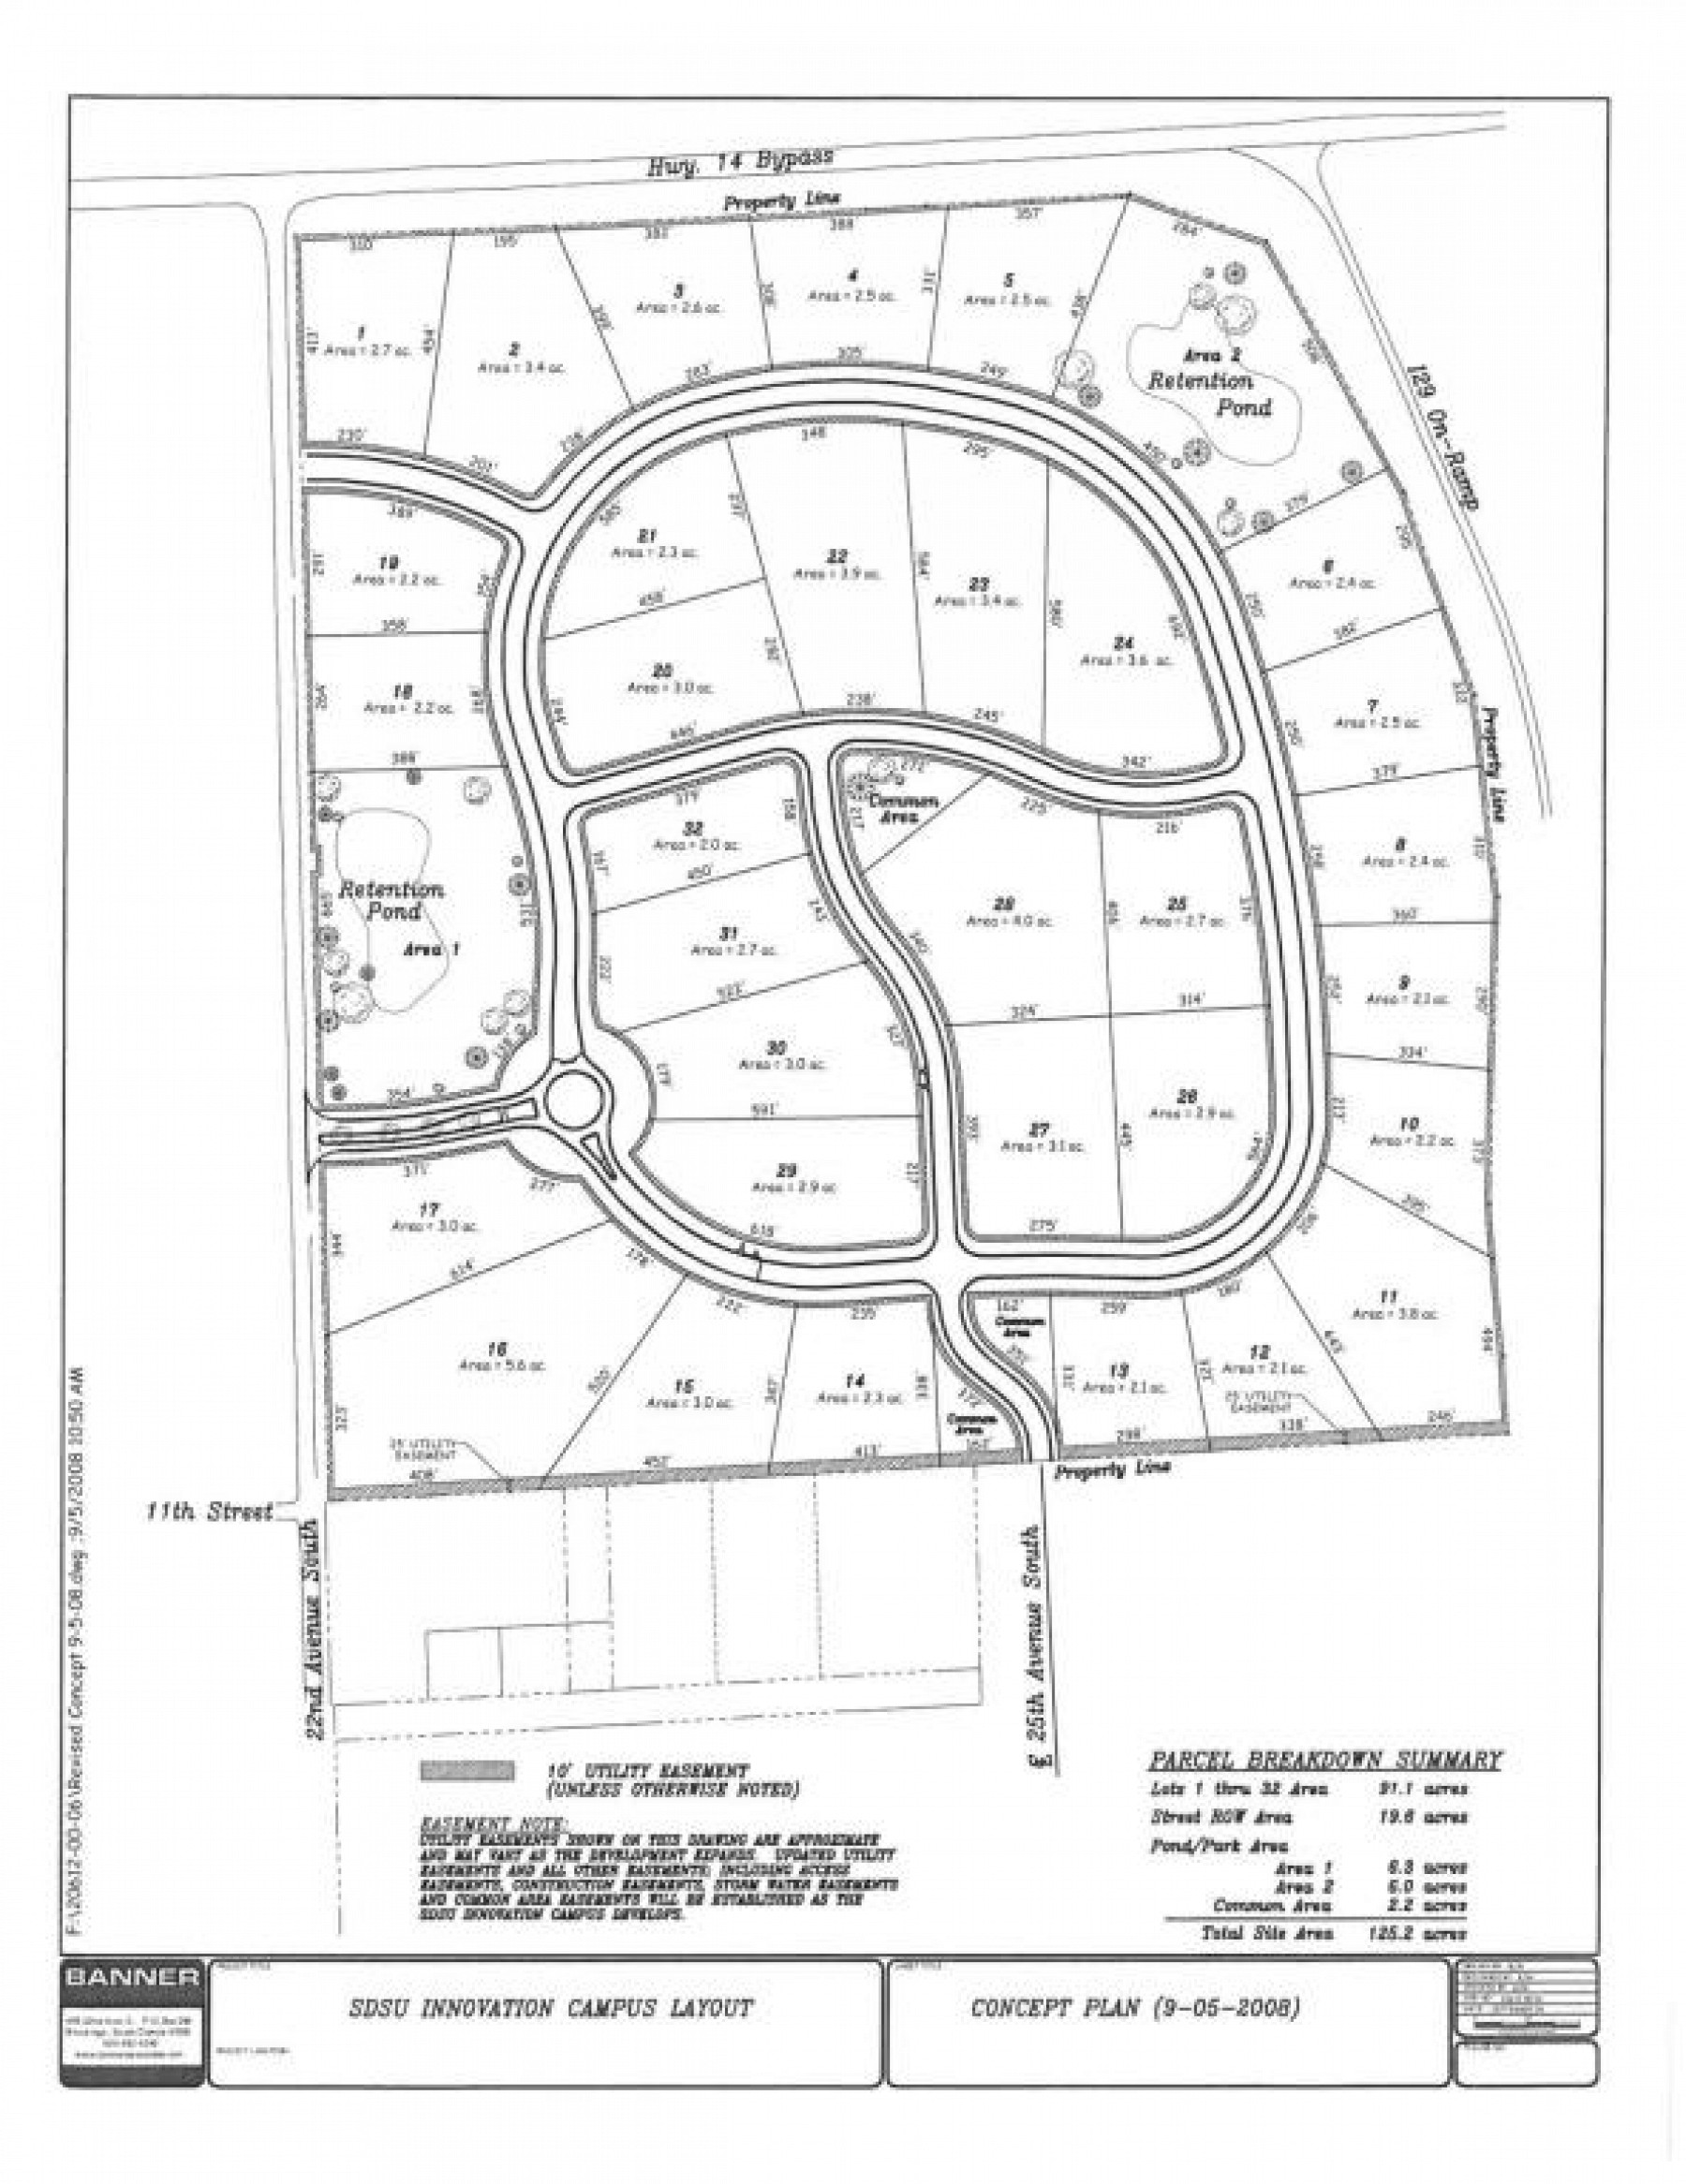 Lot 32 Innovation Campus, Brookings, SD 57006